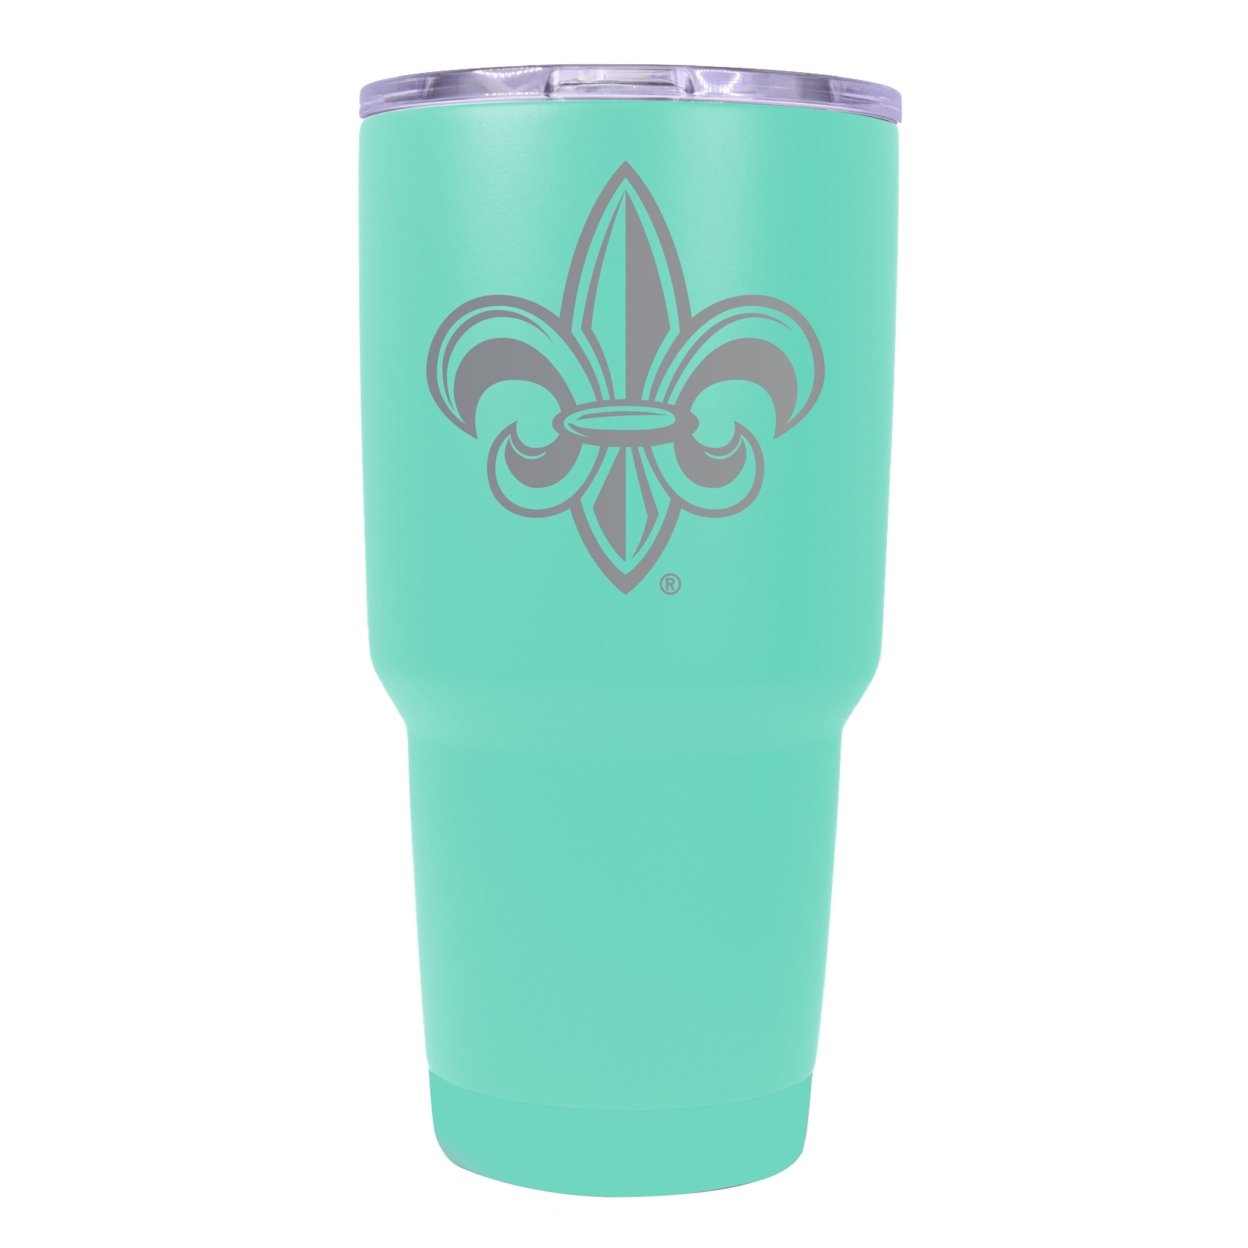 Louisiana At Lafayette 24 Oz Laser Engraved Stainless Steel Insulated Tumbler - Choose Your Color. - Red